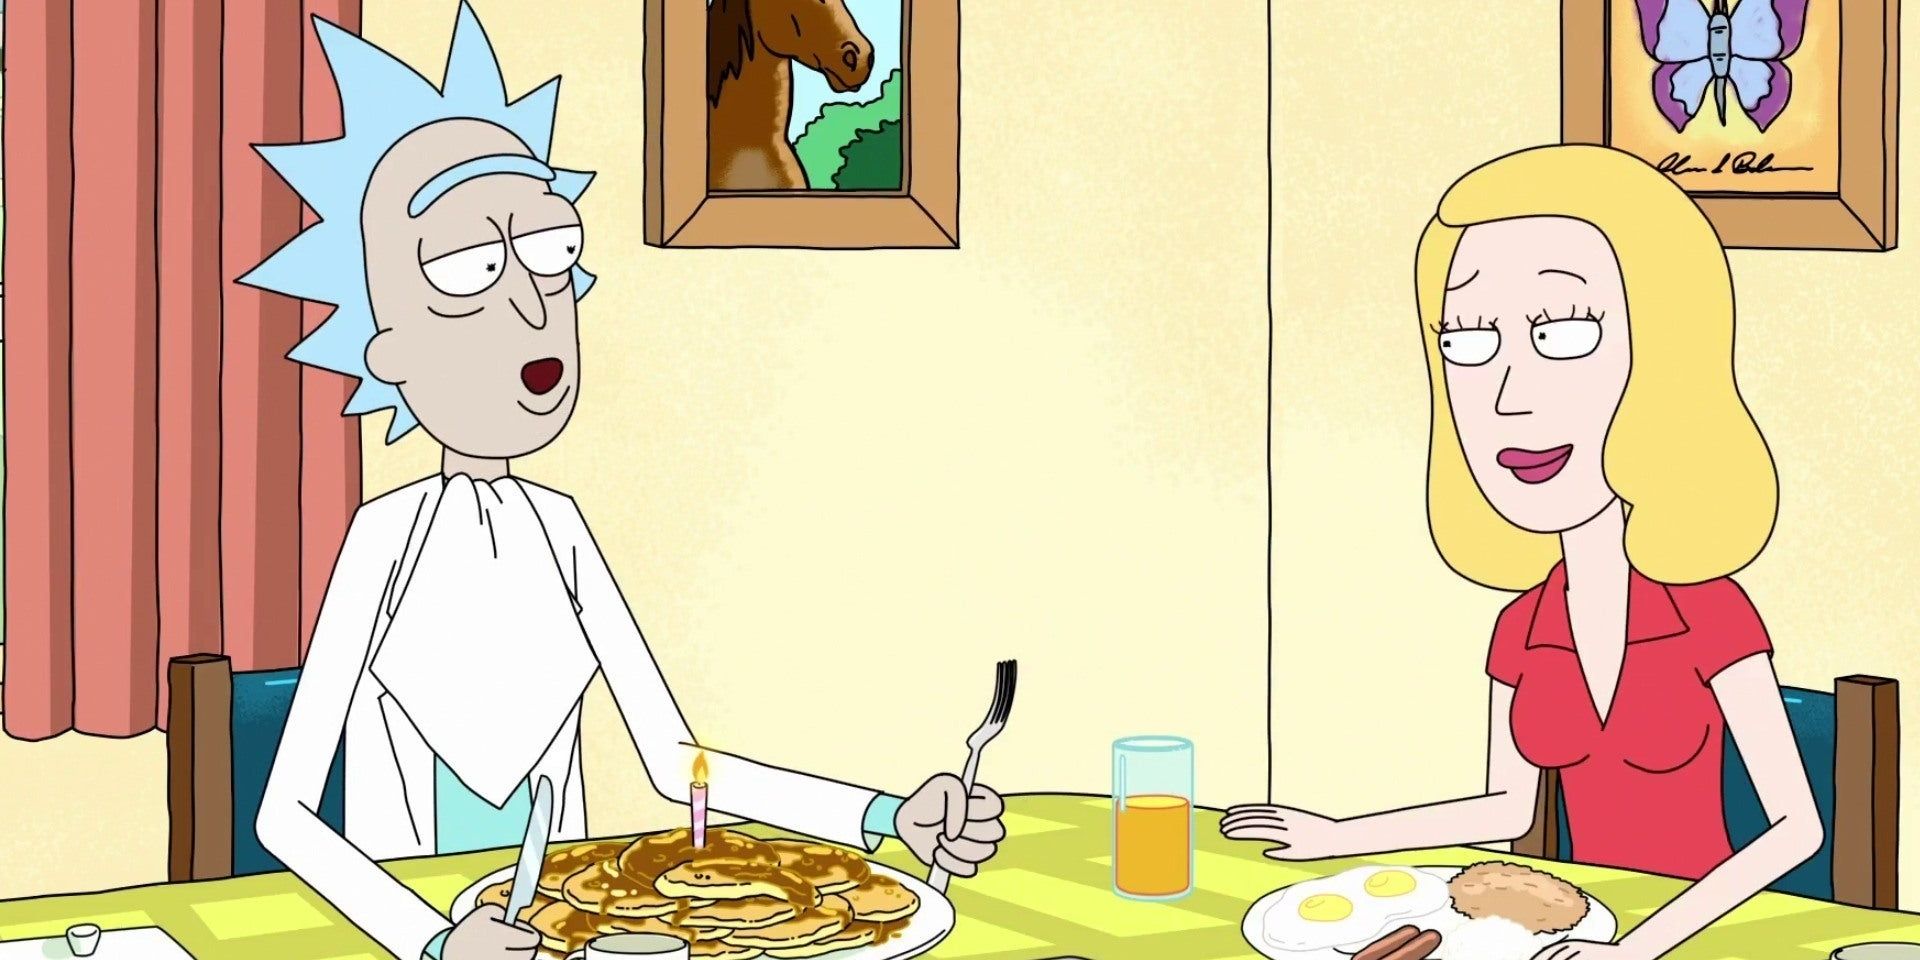 Beth and Rick in Rick & Morty